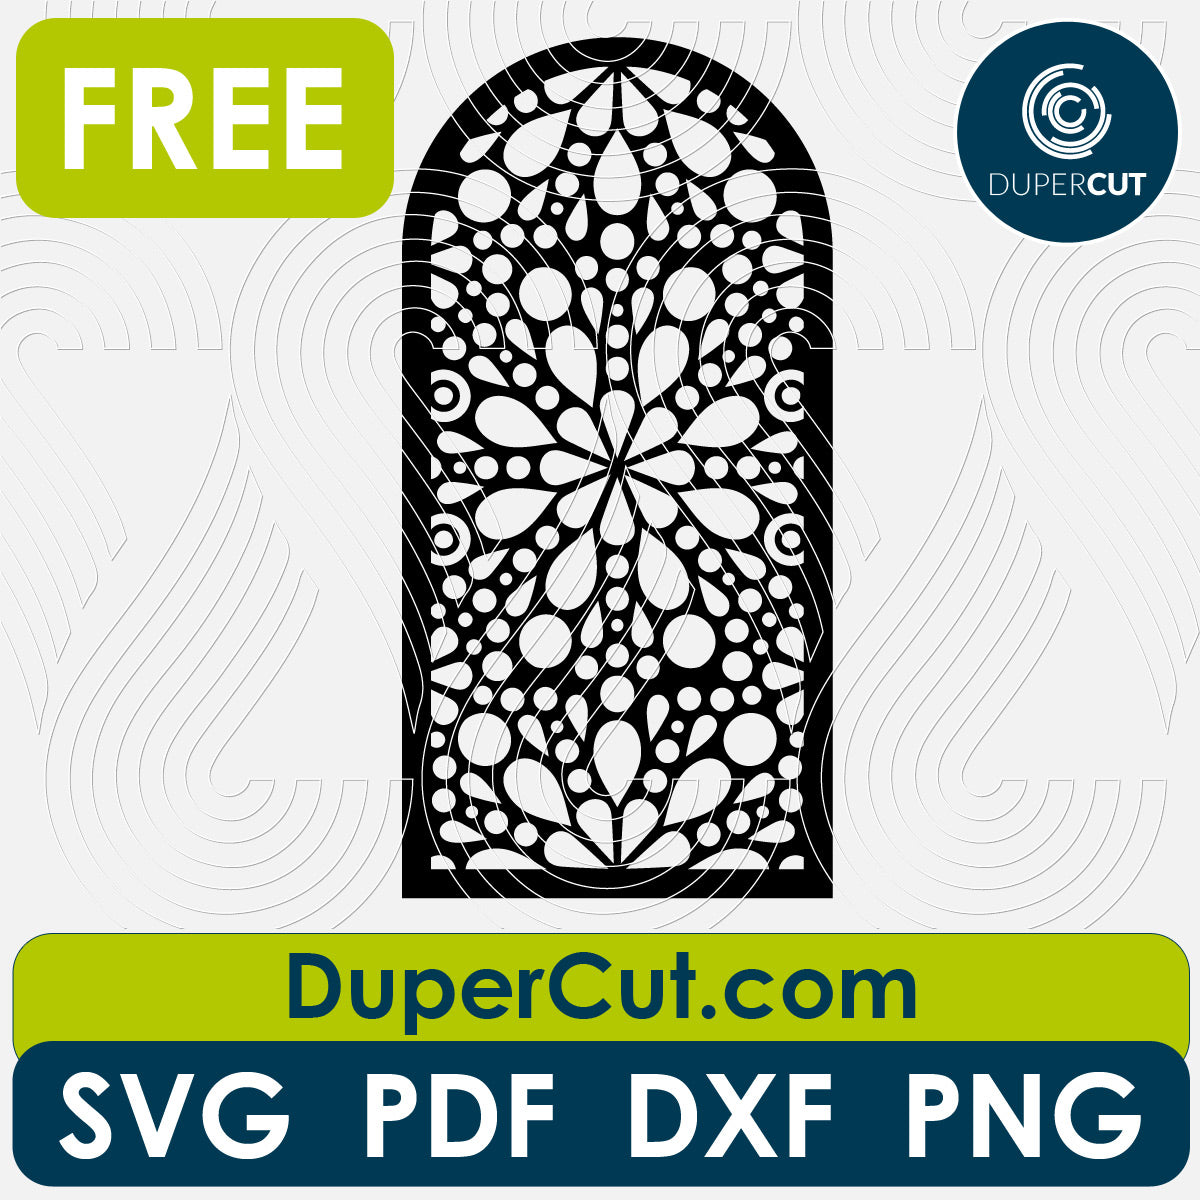 Abstract floral panel - free cutting files SVG DXF vector template for laser cutting and engraving. For Glowforge, Cricut, Silhouette, scroll saw, cnc plasma machines by DuperCut